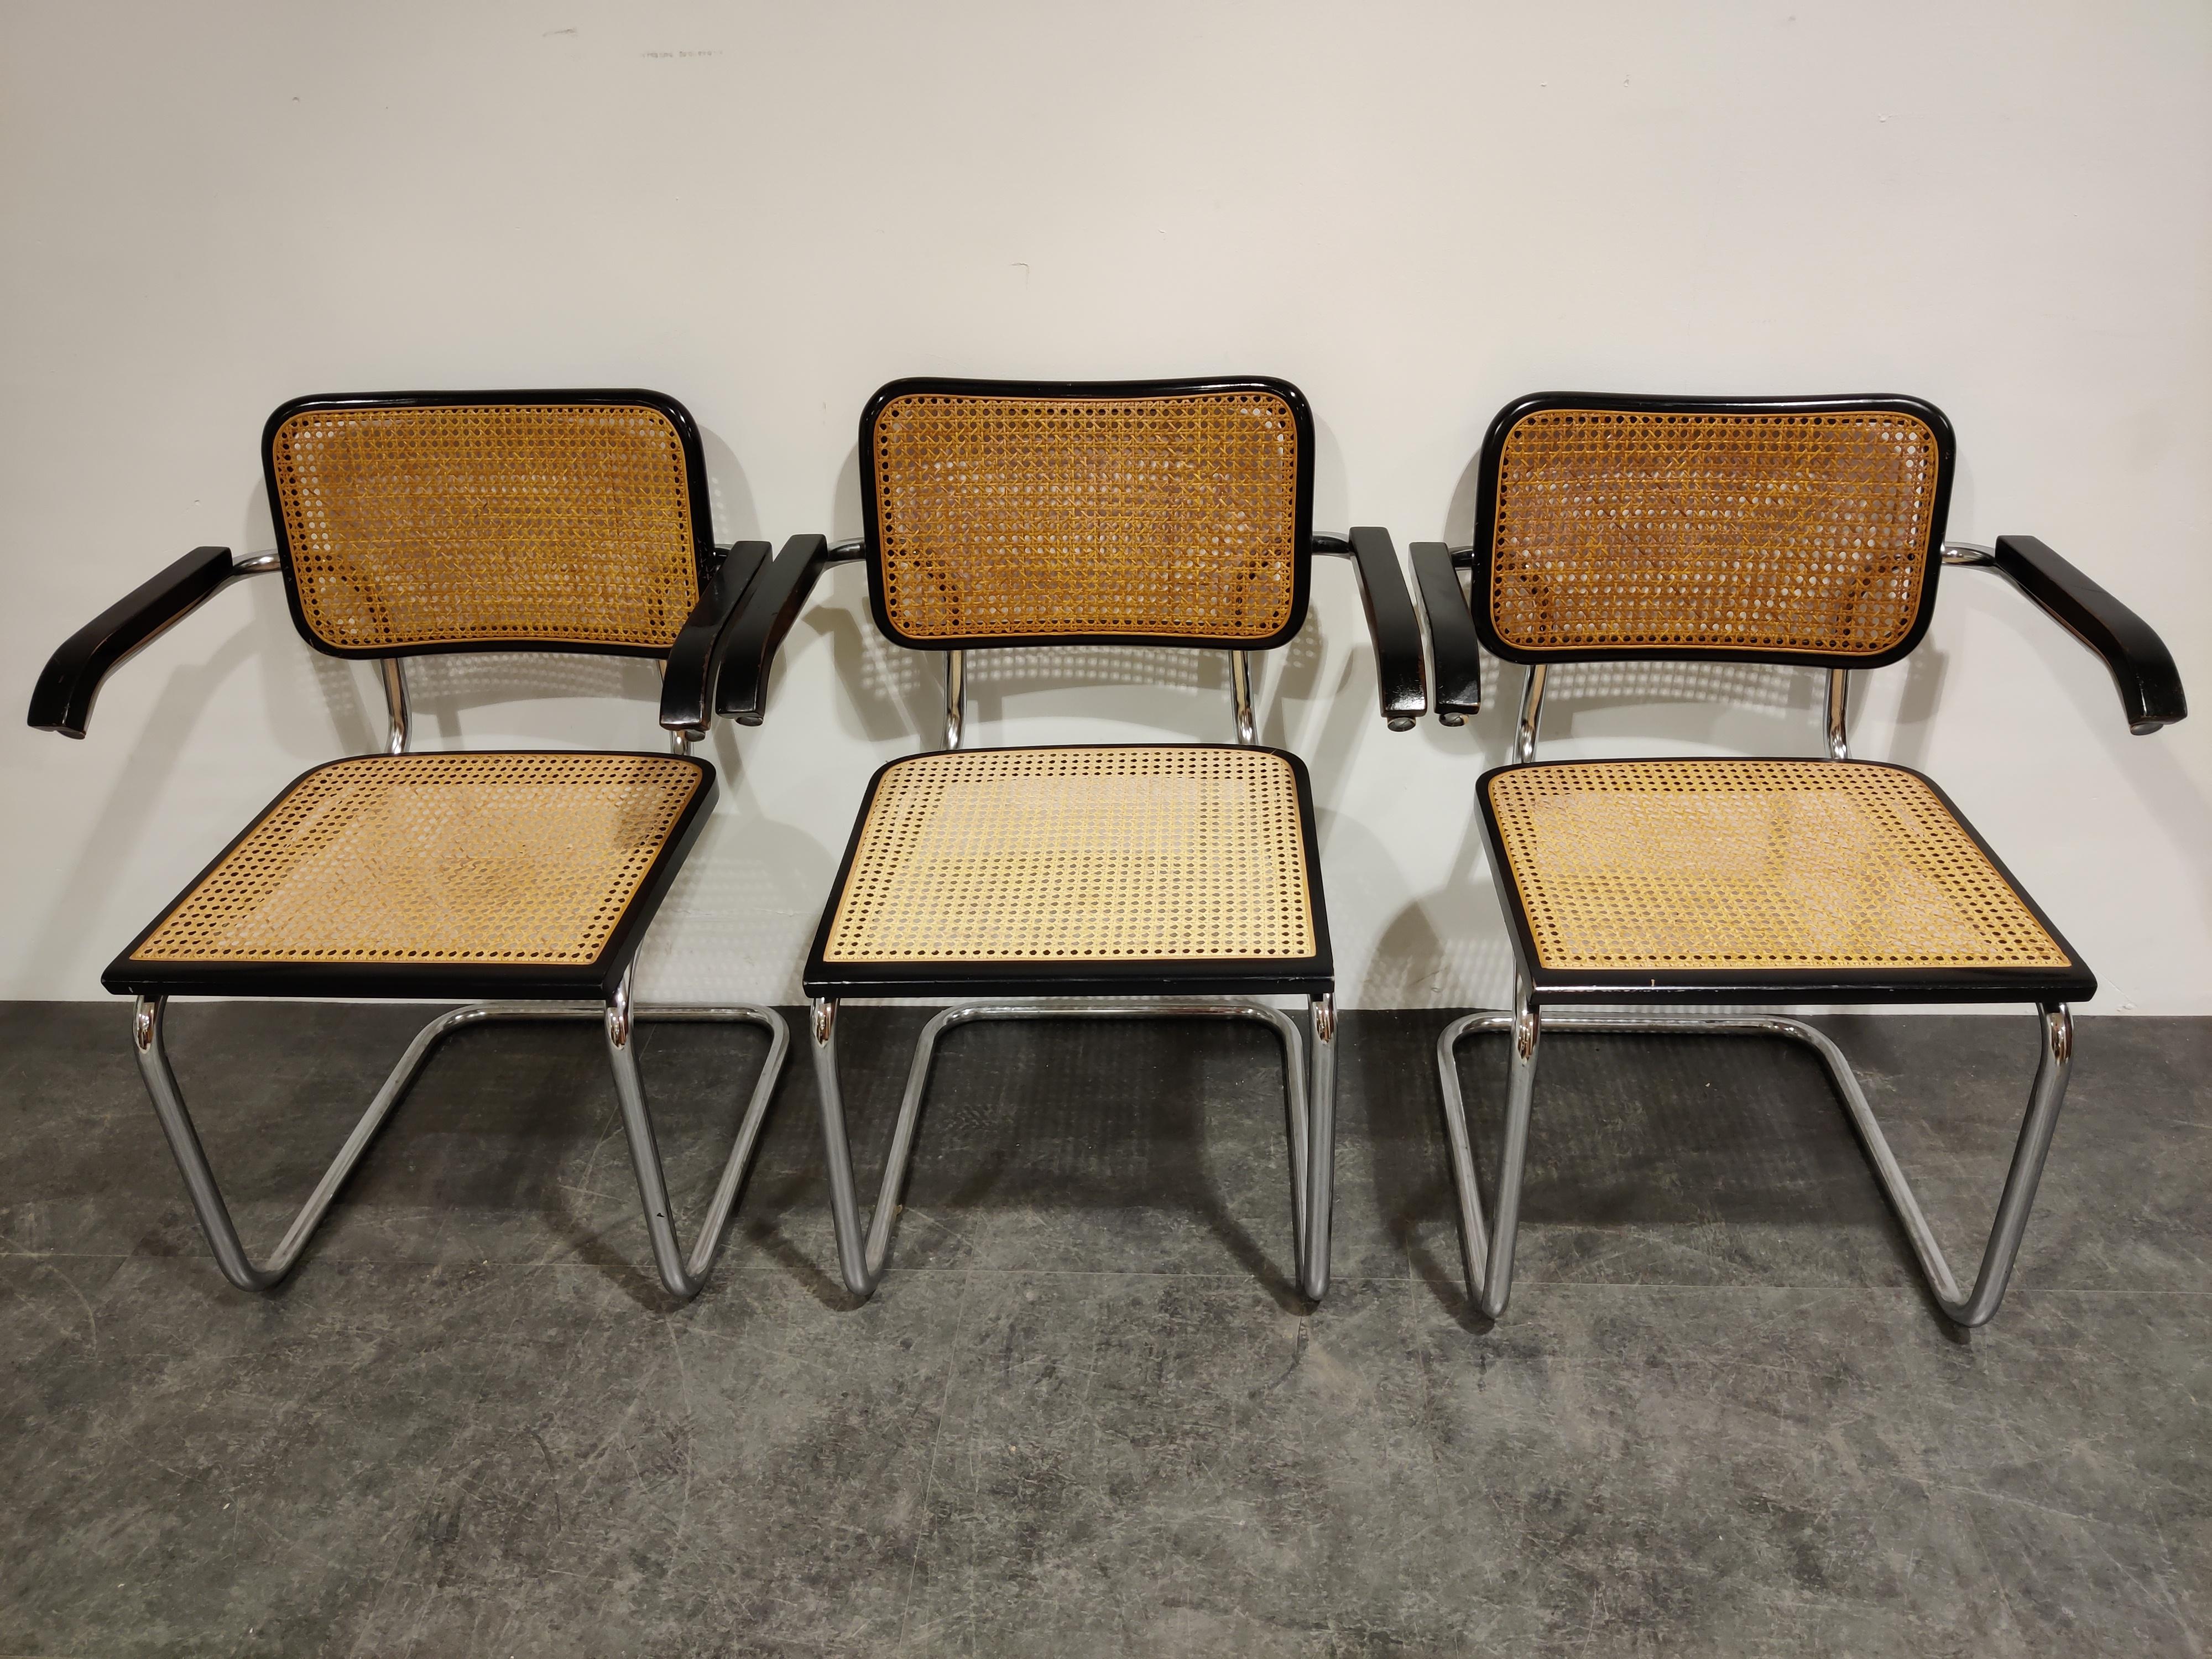 Cane Vintage Marcel Breuer Cesca B64 Chairs, Made in Italy, 1970s 'Set of 6'